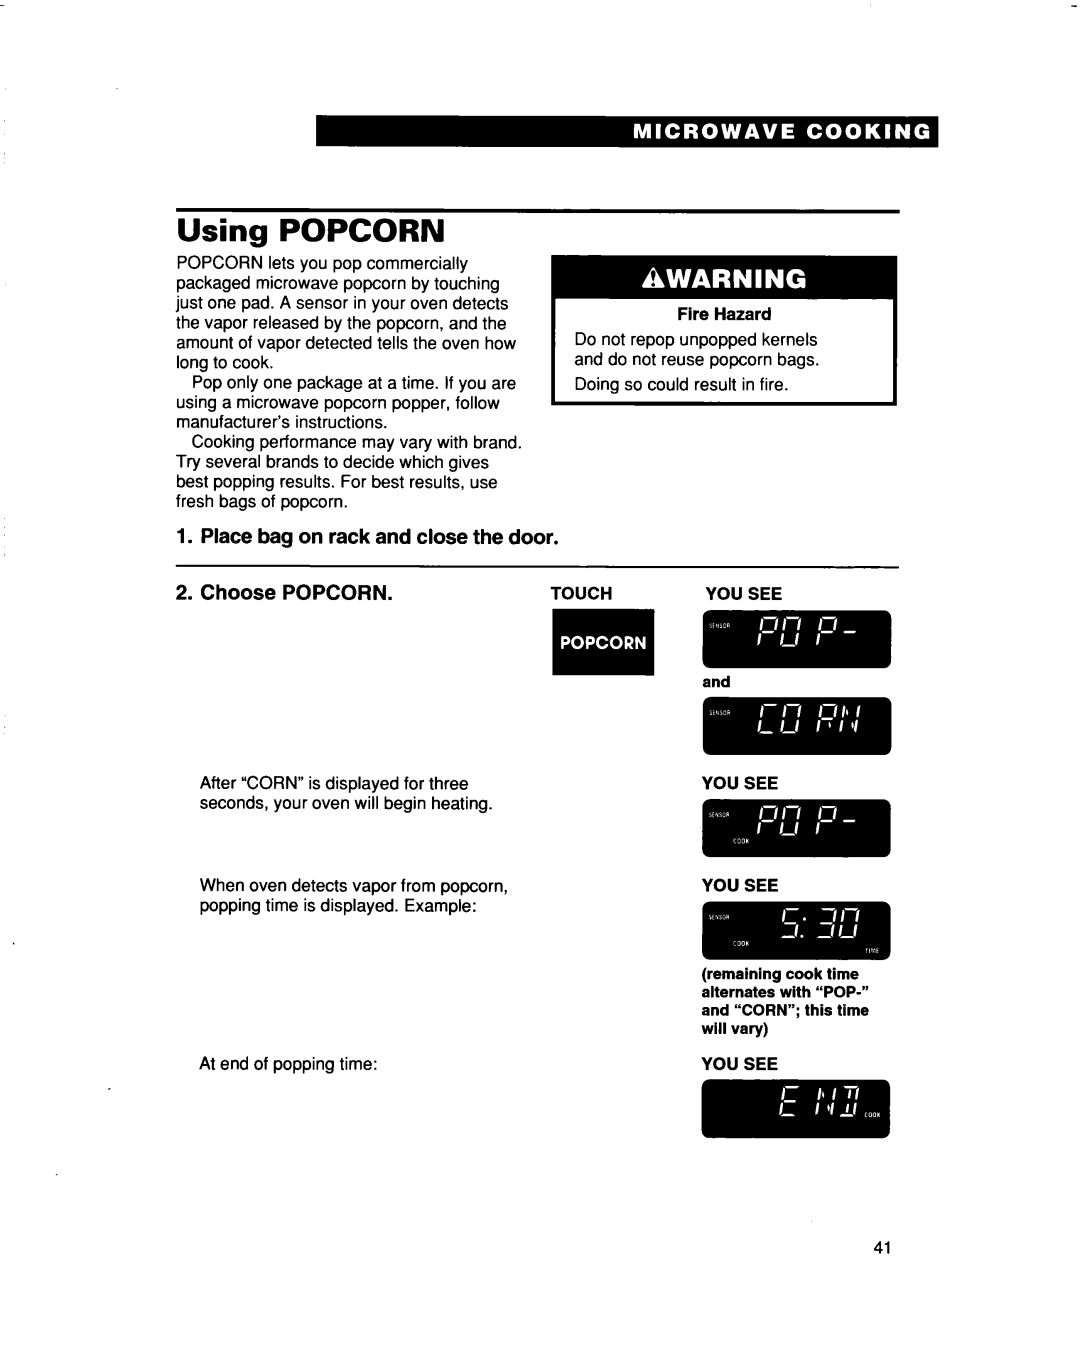 Whirlpool MH9115XB warranty Using POPCORN, Place bag on rack and close the door, Choose POPCORN 